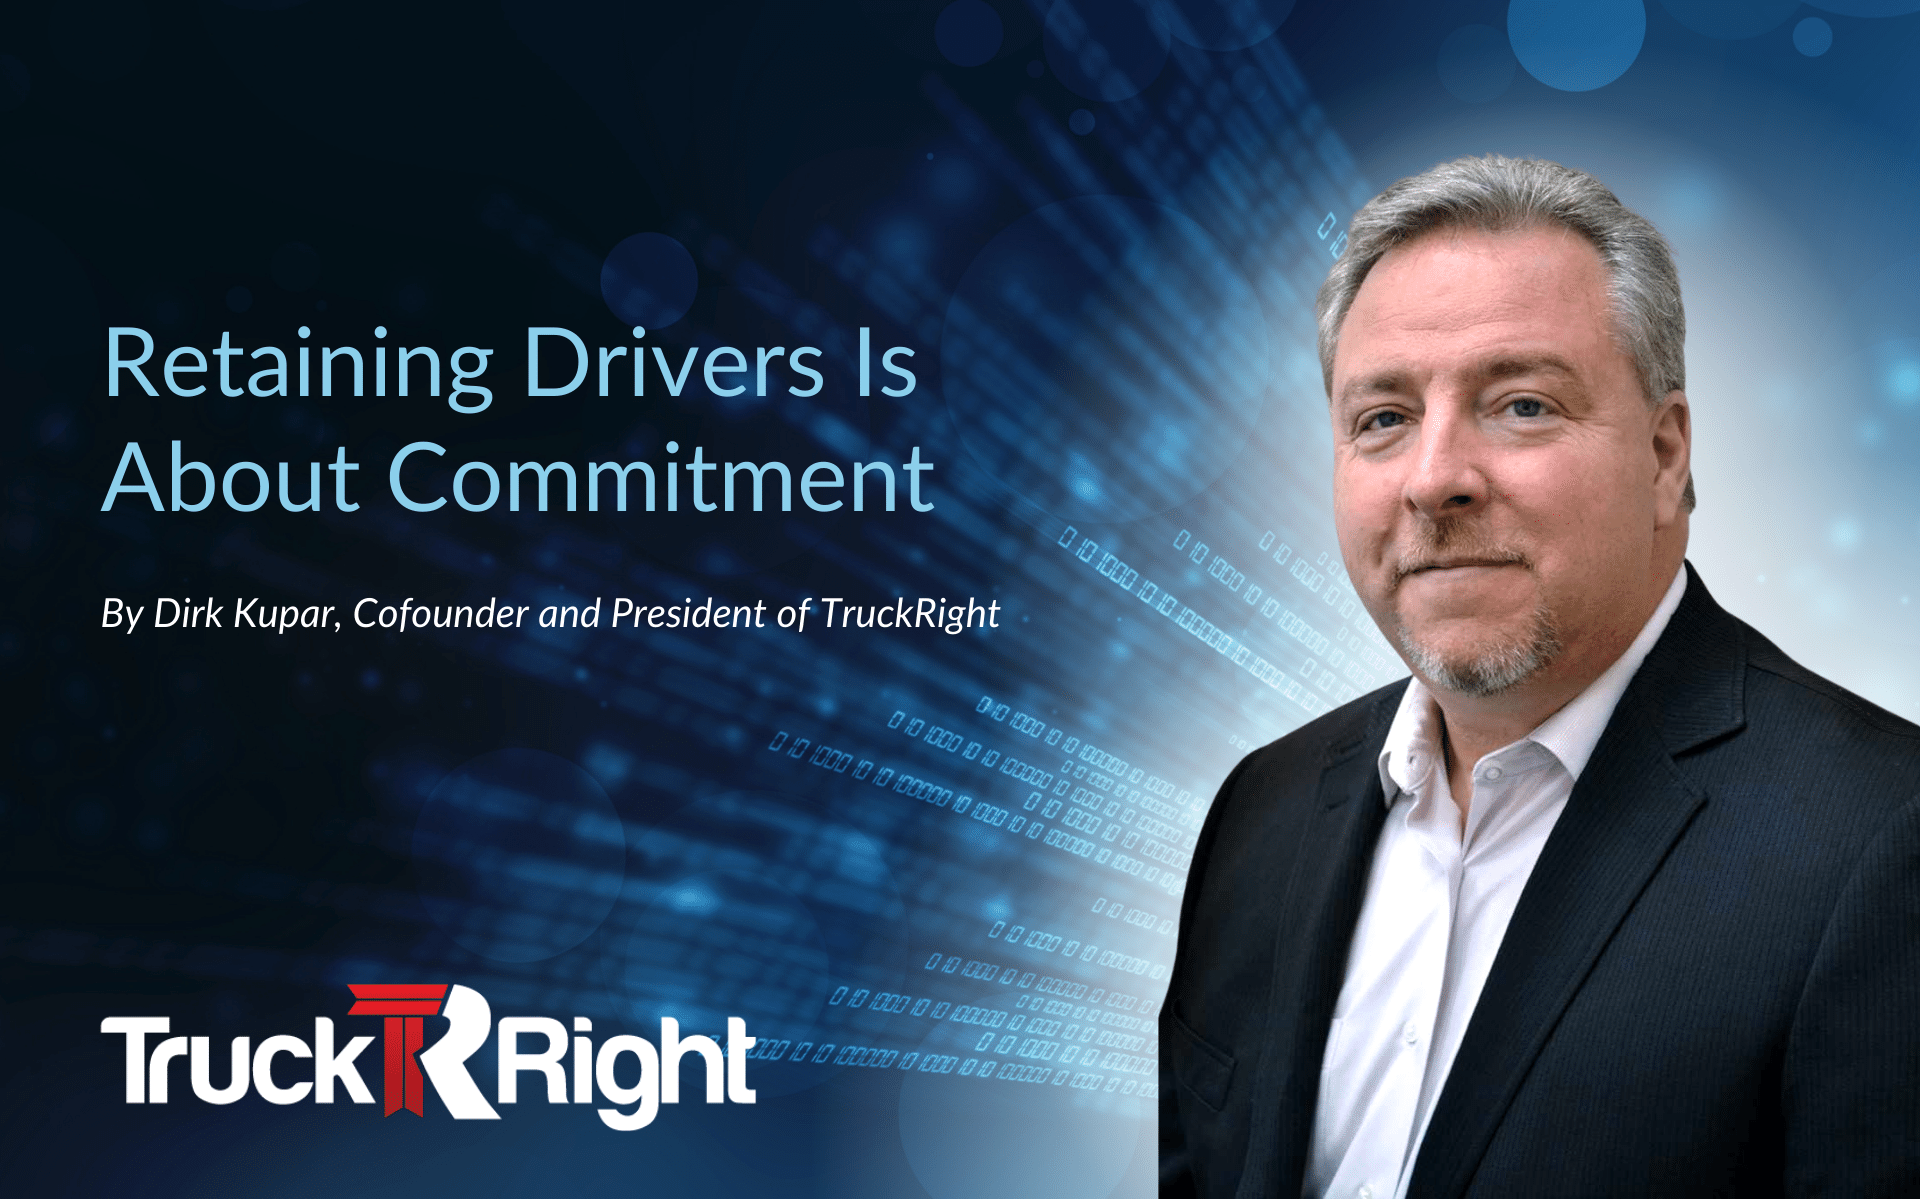 Retaining Drivers Is About Commitment